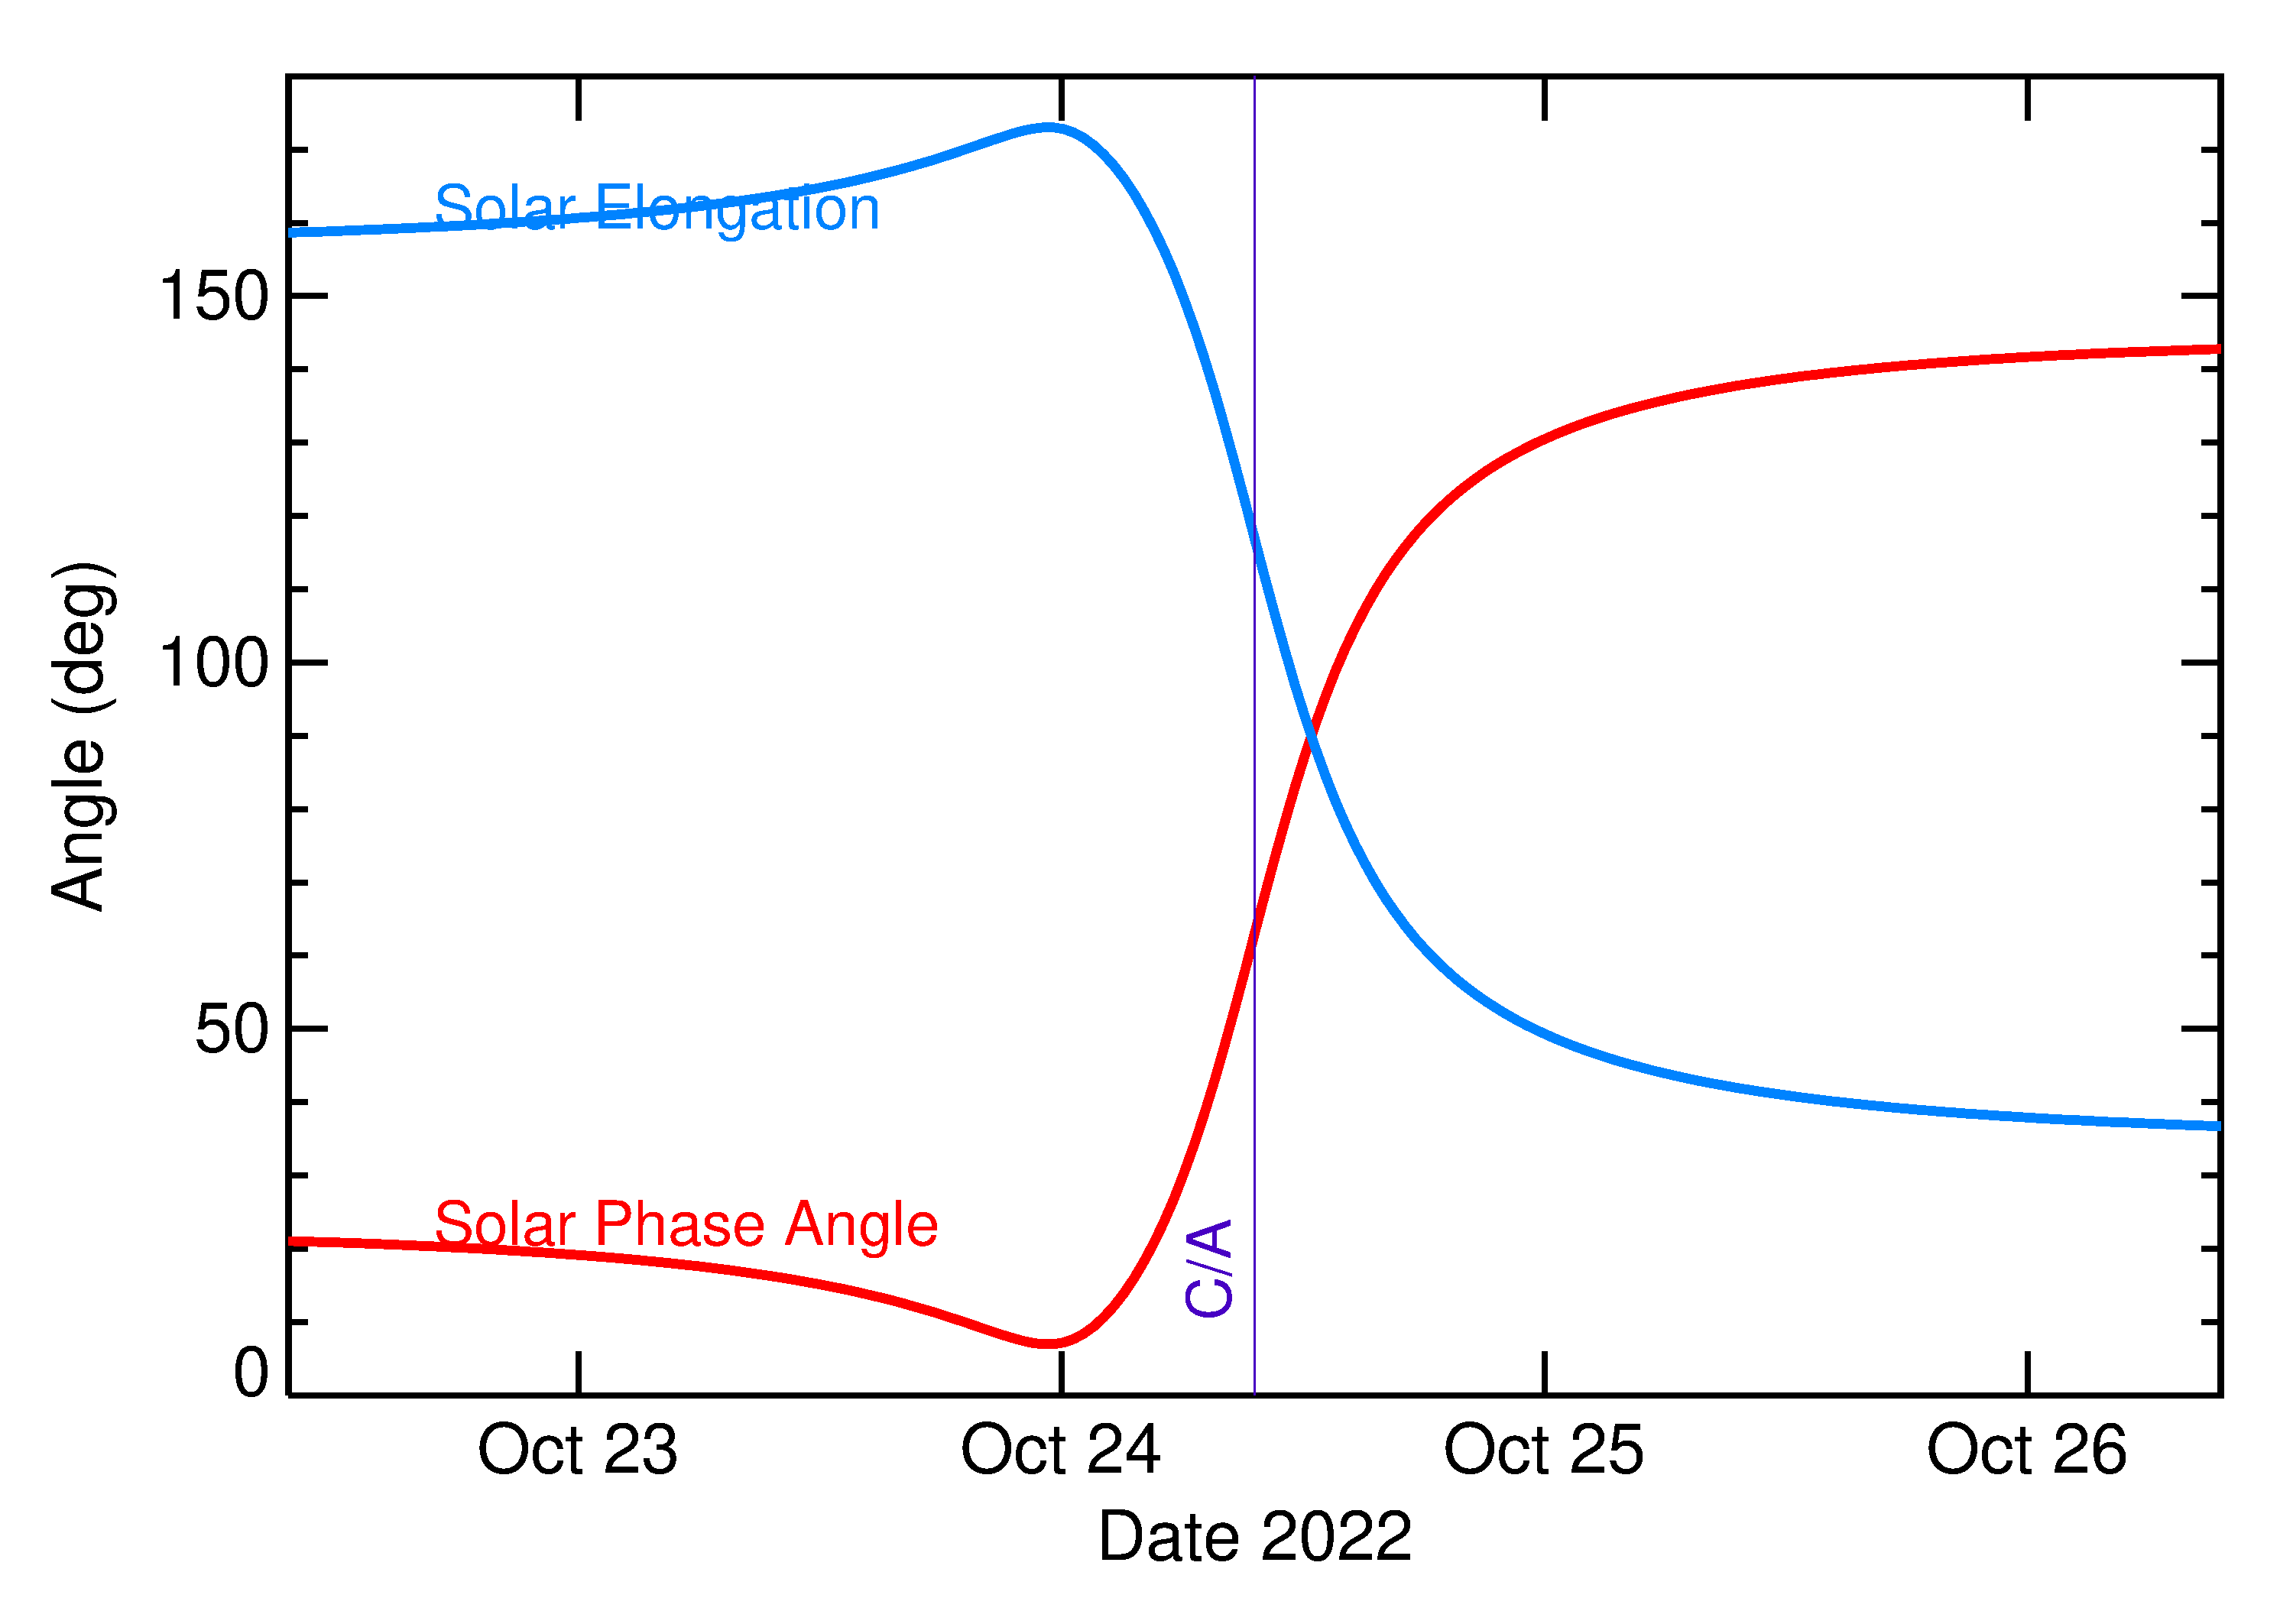 Solar Elongation and Solar Phase Angle of 2022 UV7 in the days around closest approach